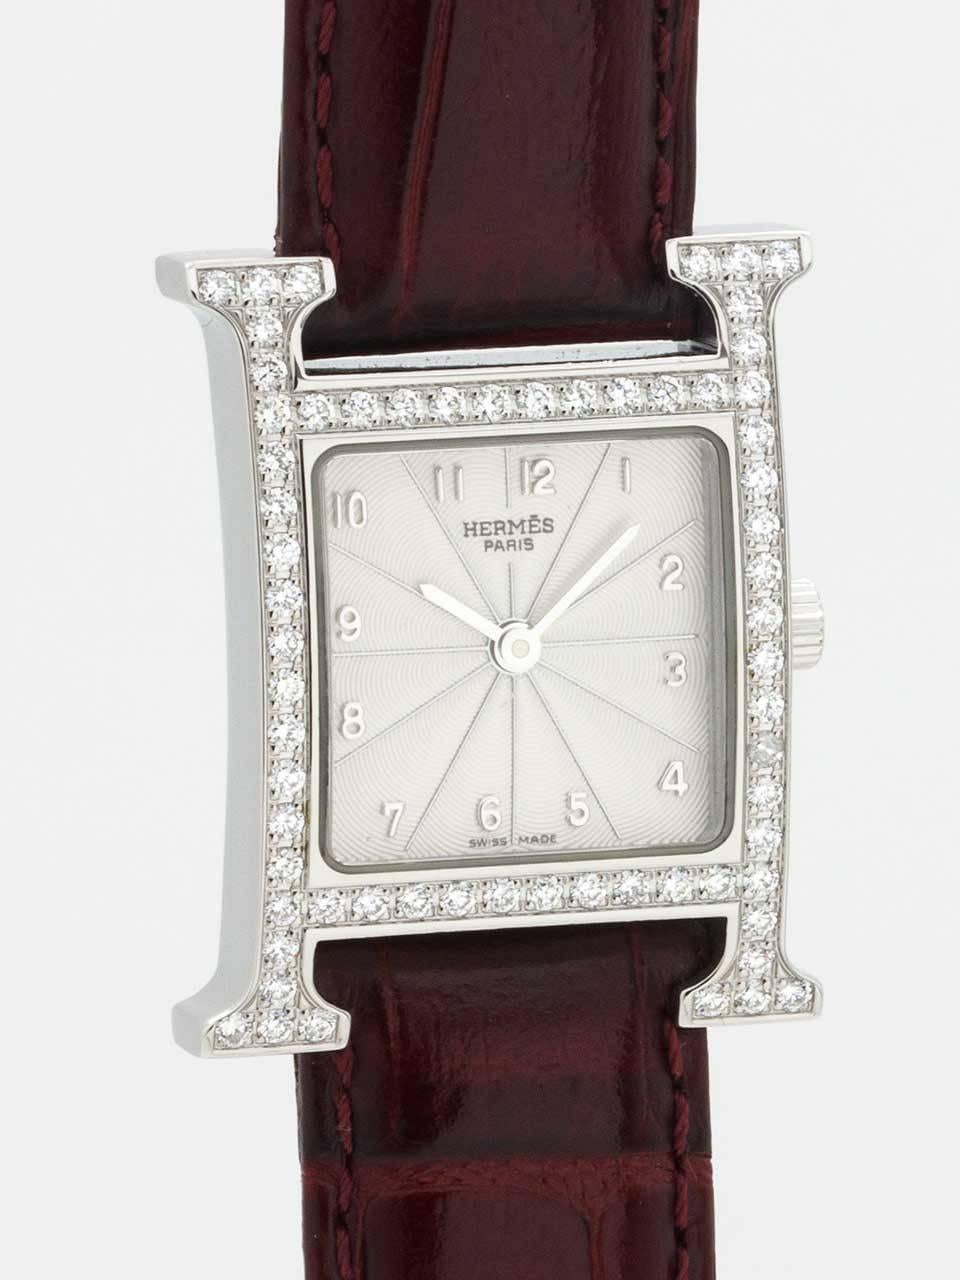 Lady's Hermes Stainless Steel and Diamond H-Hour Wristwatch ref HH1 230 circa 2000s. 21 x 30mm stainless steel H shaped case with diamond set bezel and lugs. Sapphire crystal and signed crown. Silvered guilloche dial with applied Arabic numerals and